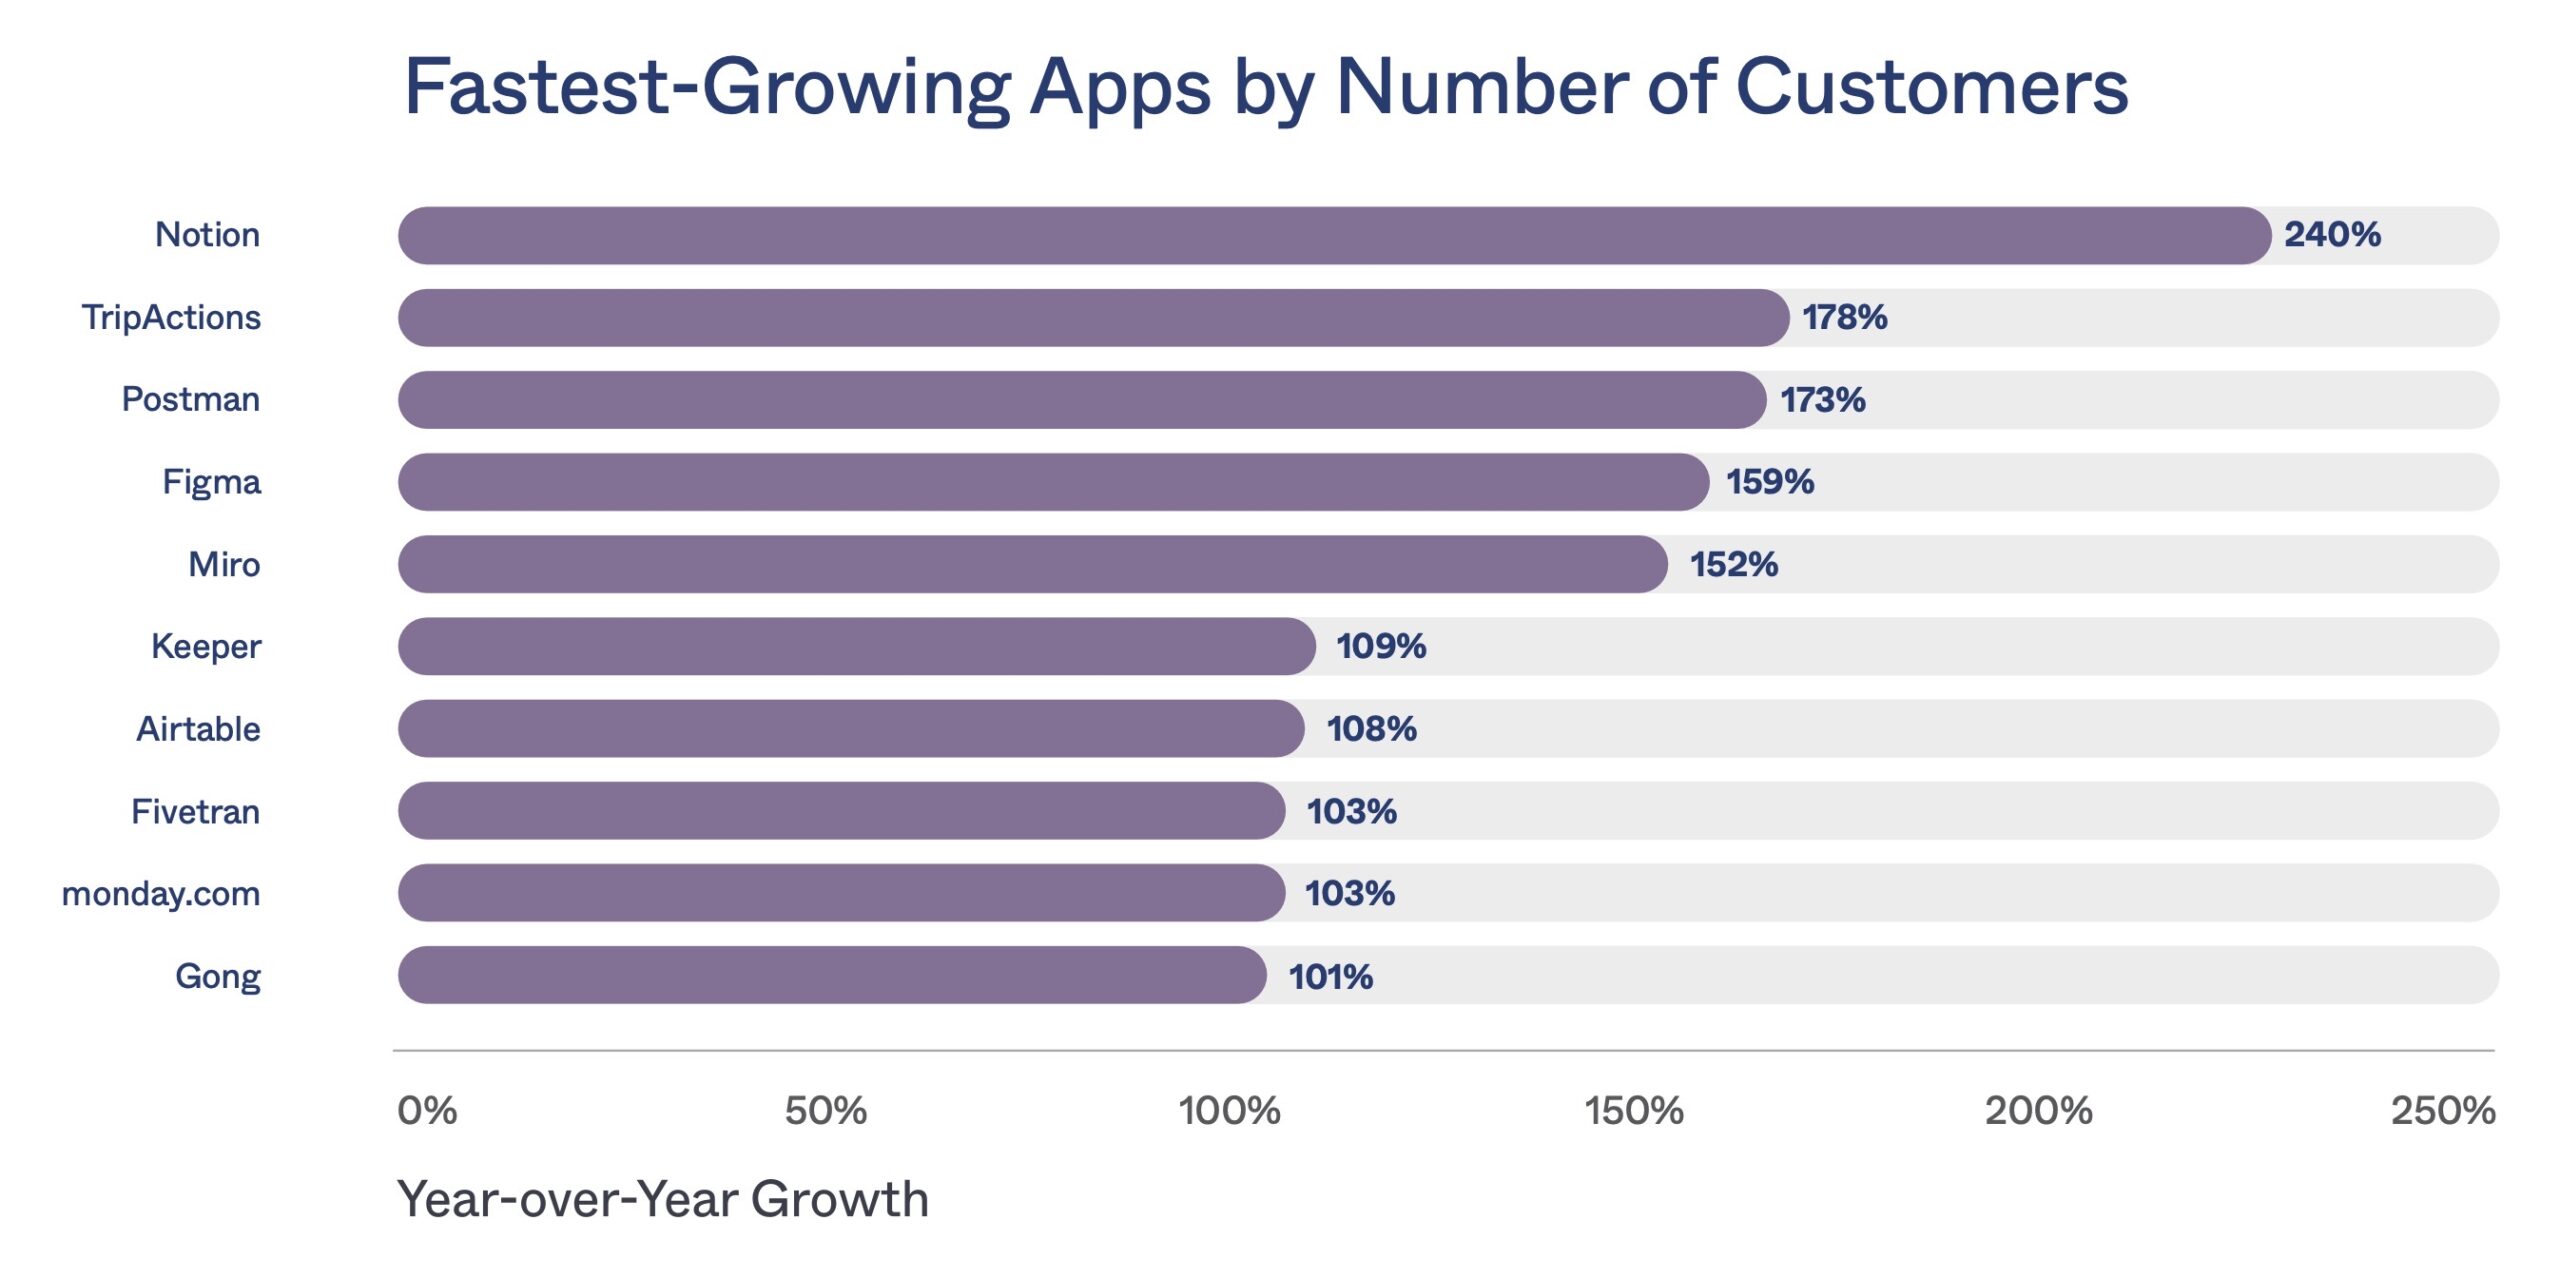 Fastest growing apps at the workplace